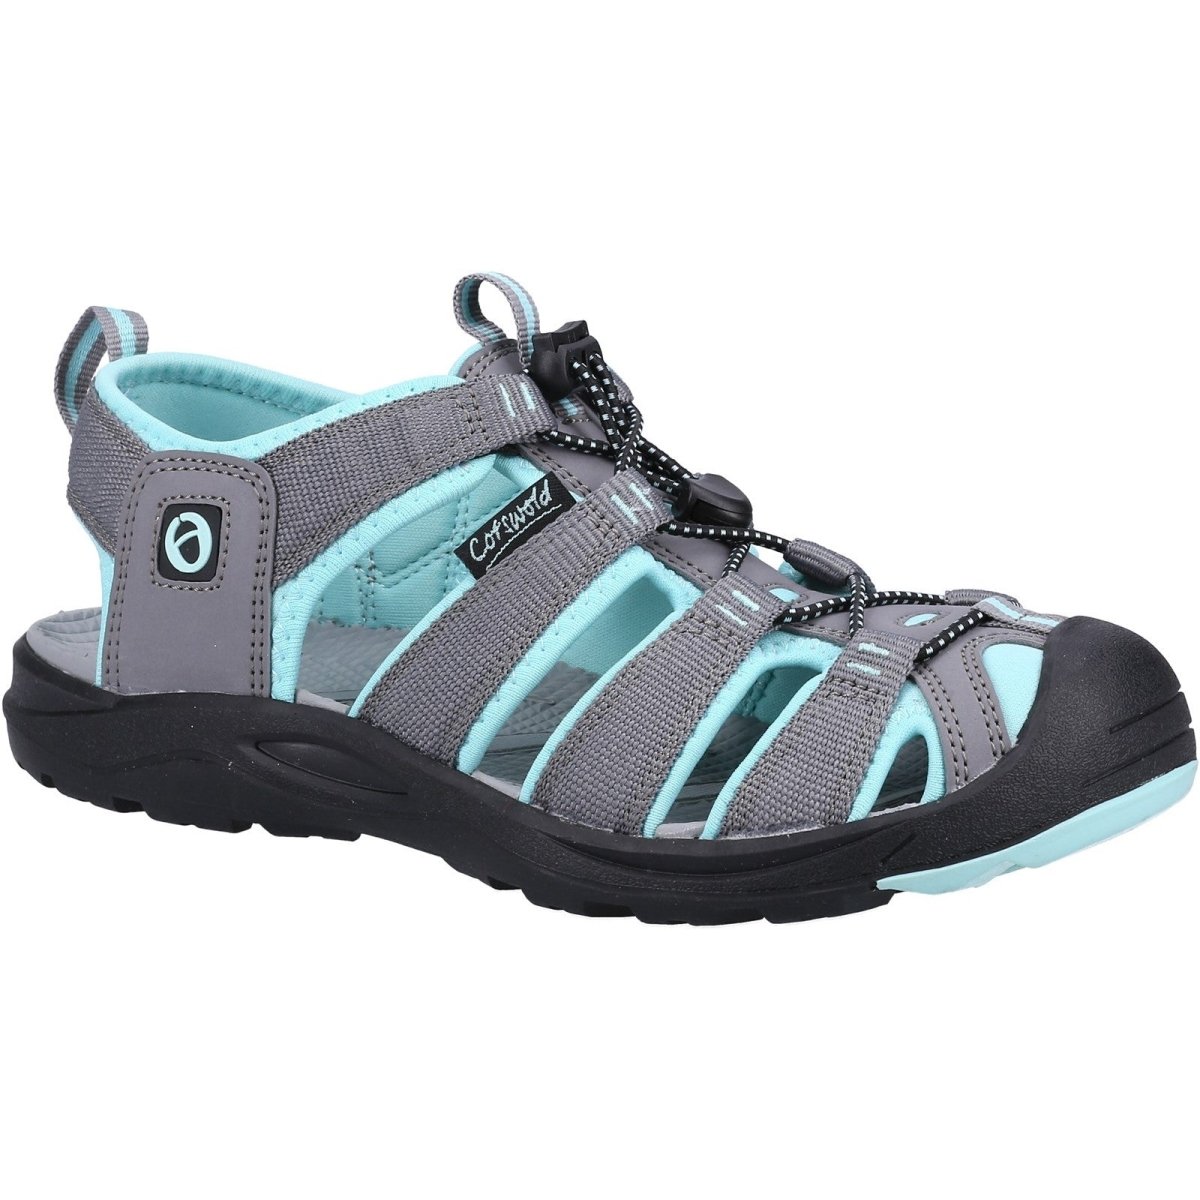 Cotswold Marshfield Ladies Summer Walking Recycled Sandals - Shoe Store Direct